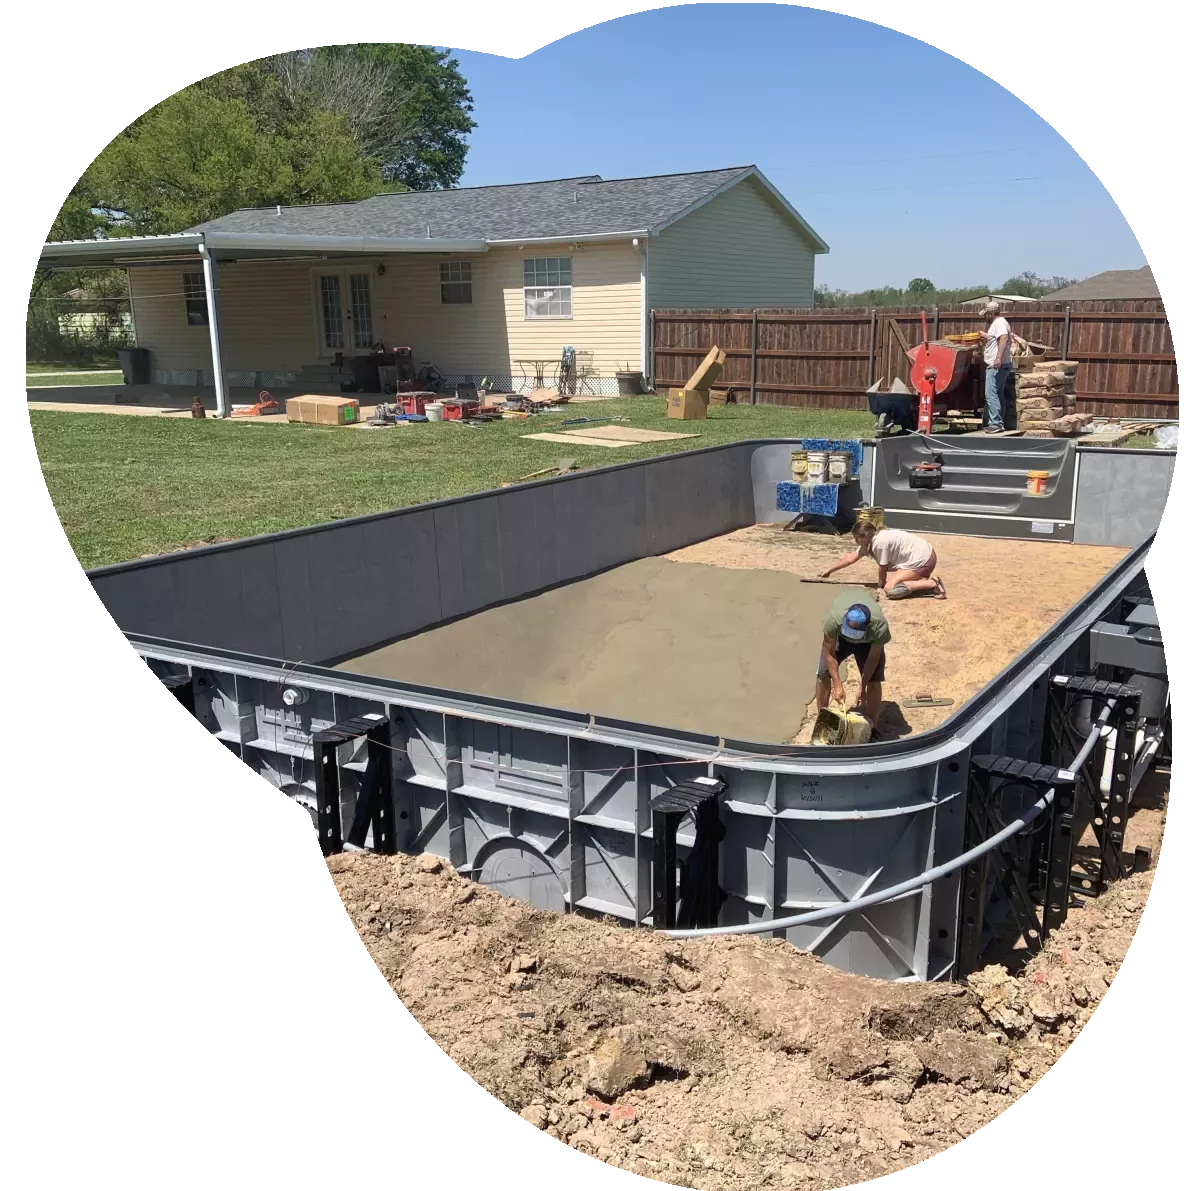 A vinyl pool being constructed.